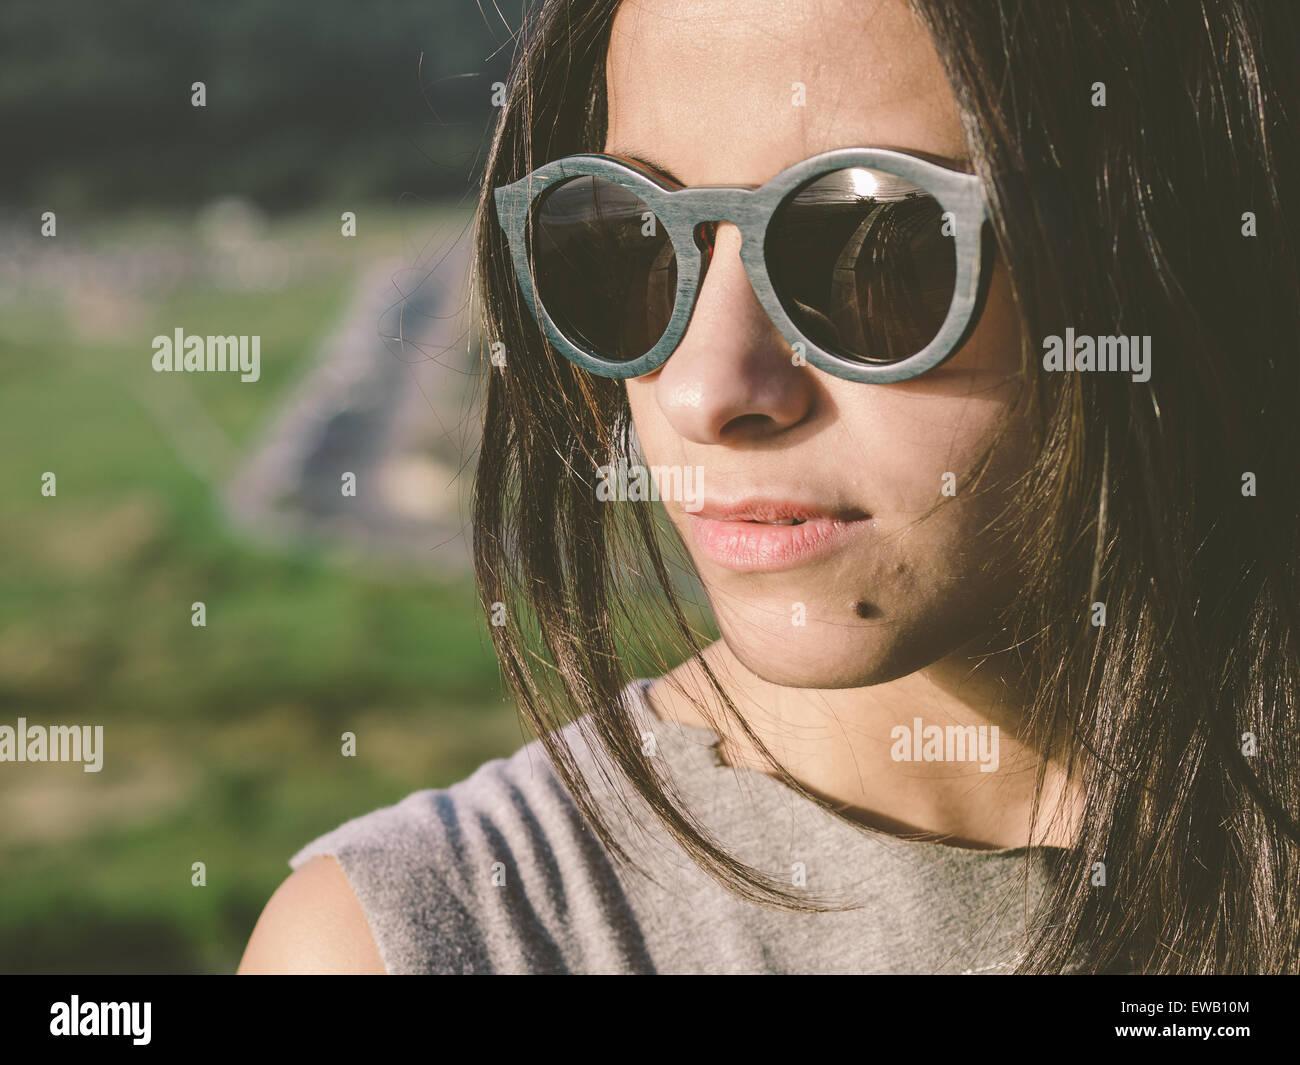 Brunette woman with sunglasses in a close up portrait outdoors Stock Photo